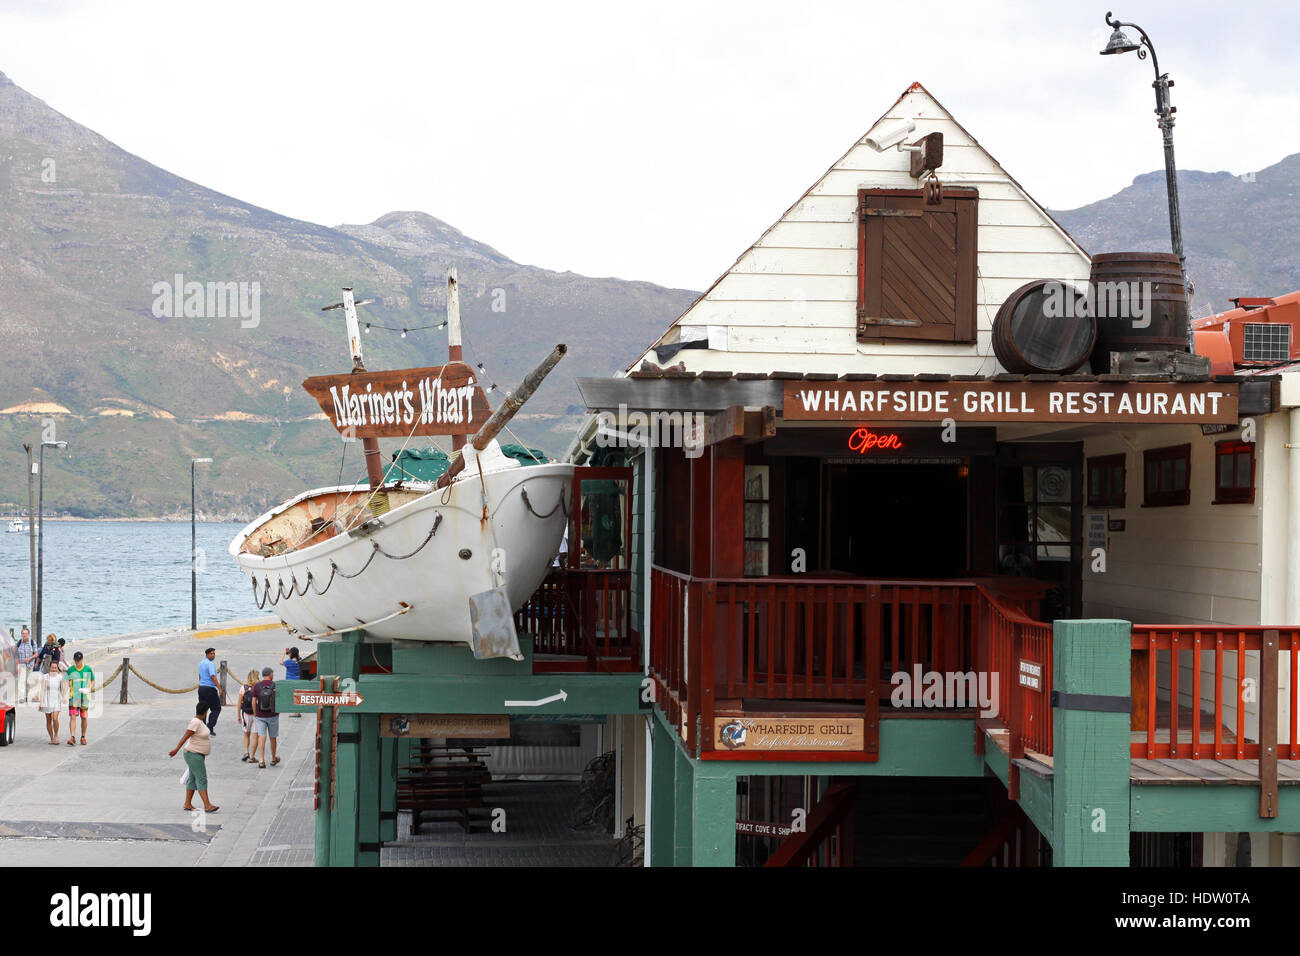 Wharfside Grill Restaurant at Mariner's Wharf, Hout Bay, Cape Town, South Africa Stock Photo